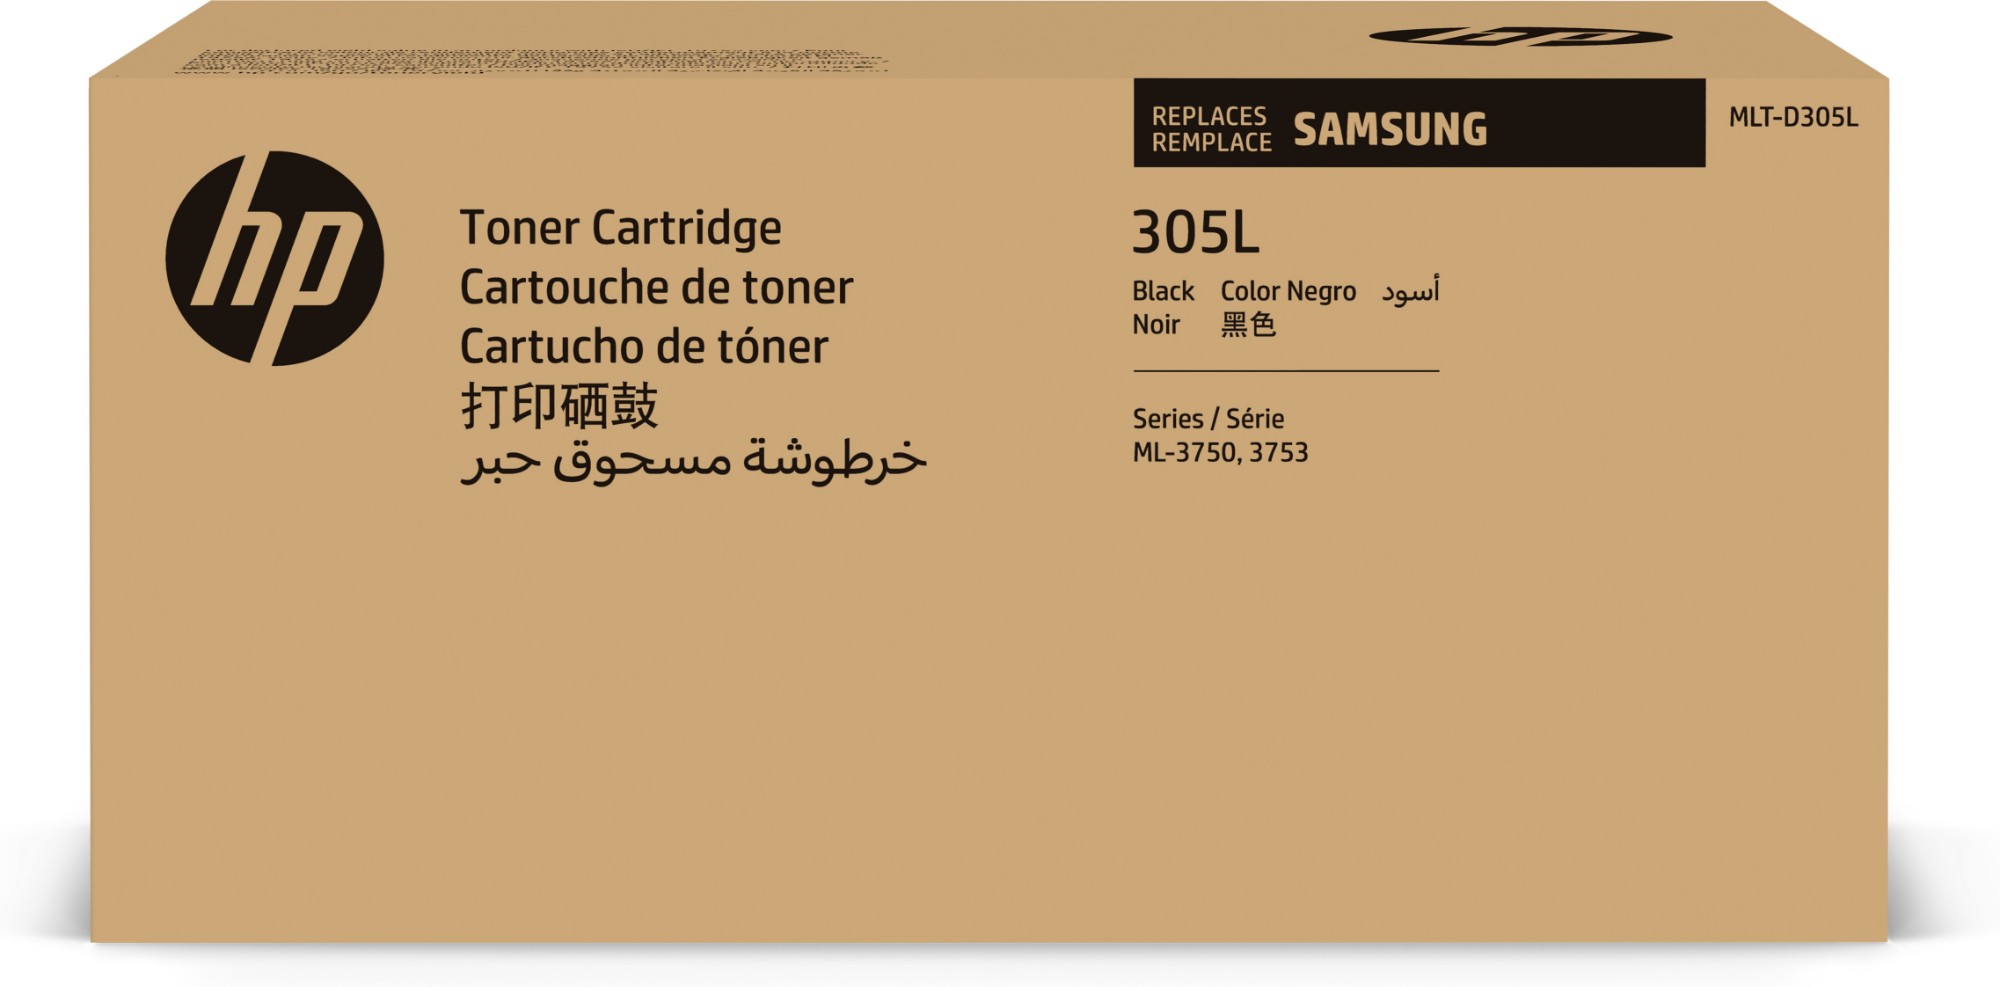 HP SV048A/MLT-D305L Toner cartridge, 15K pages ISO/IEC 19752 for Samsung ML 3750